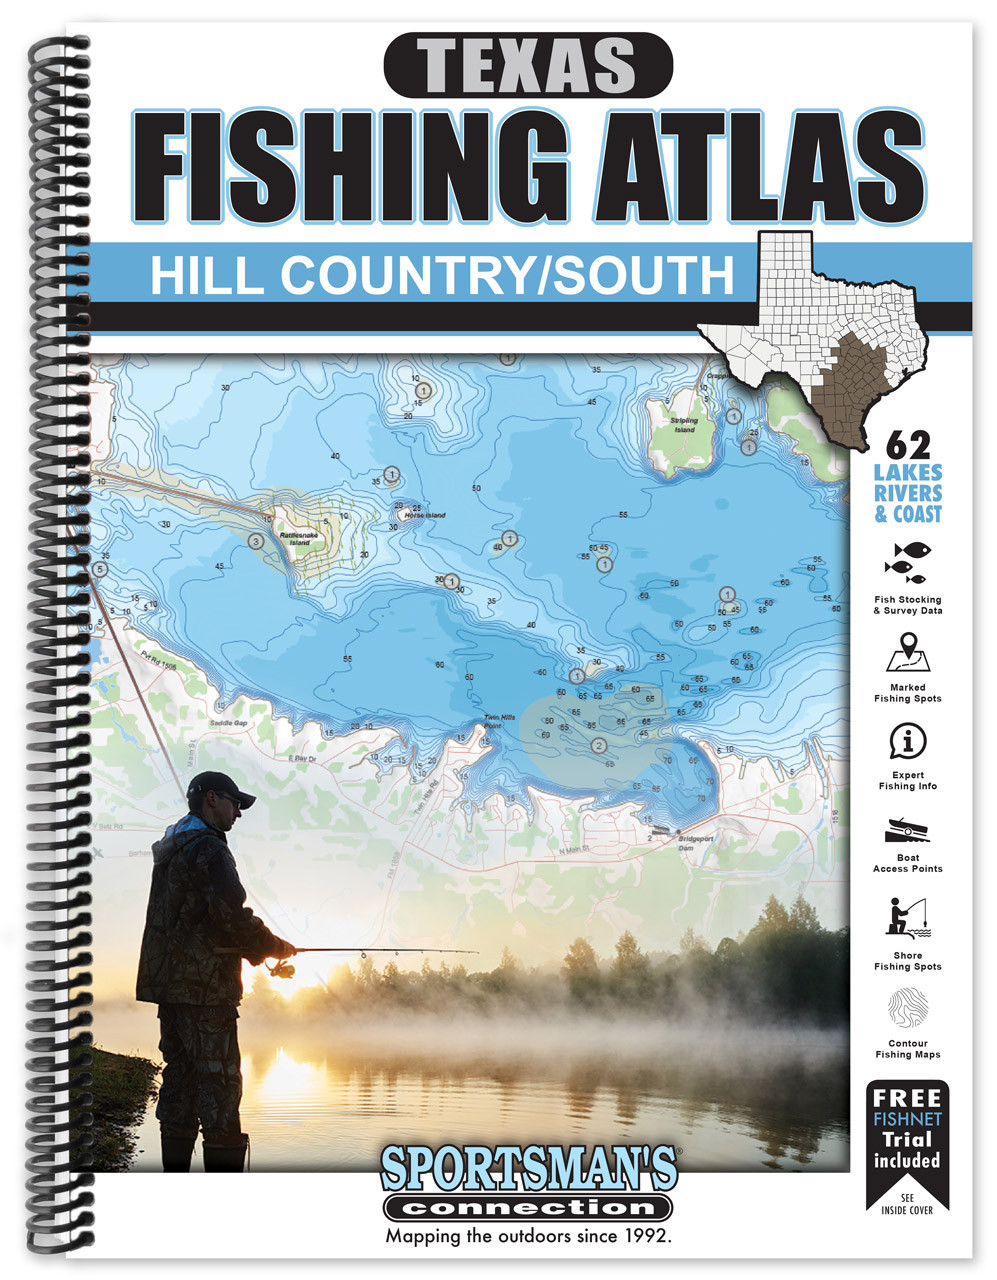 Hill Country/South Texas Fishing Atlas